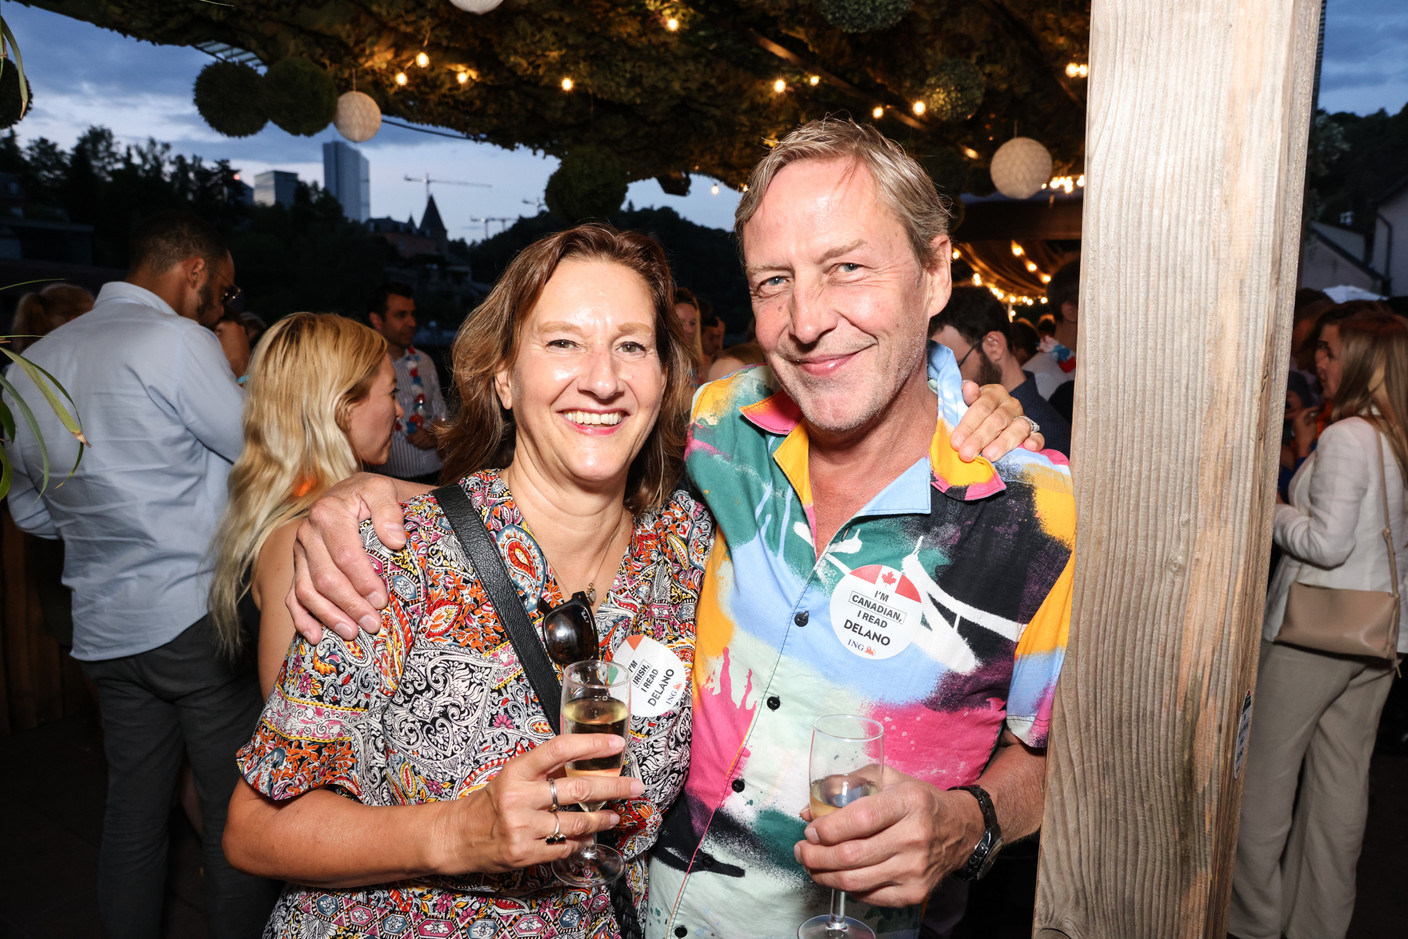 Mary Carey (PwC) and Michael Dubrule (Michael Dubrule Media) seen during the Delano summer party, 13 July 2023. Photo: Marie Russillo/Maison Moderne